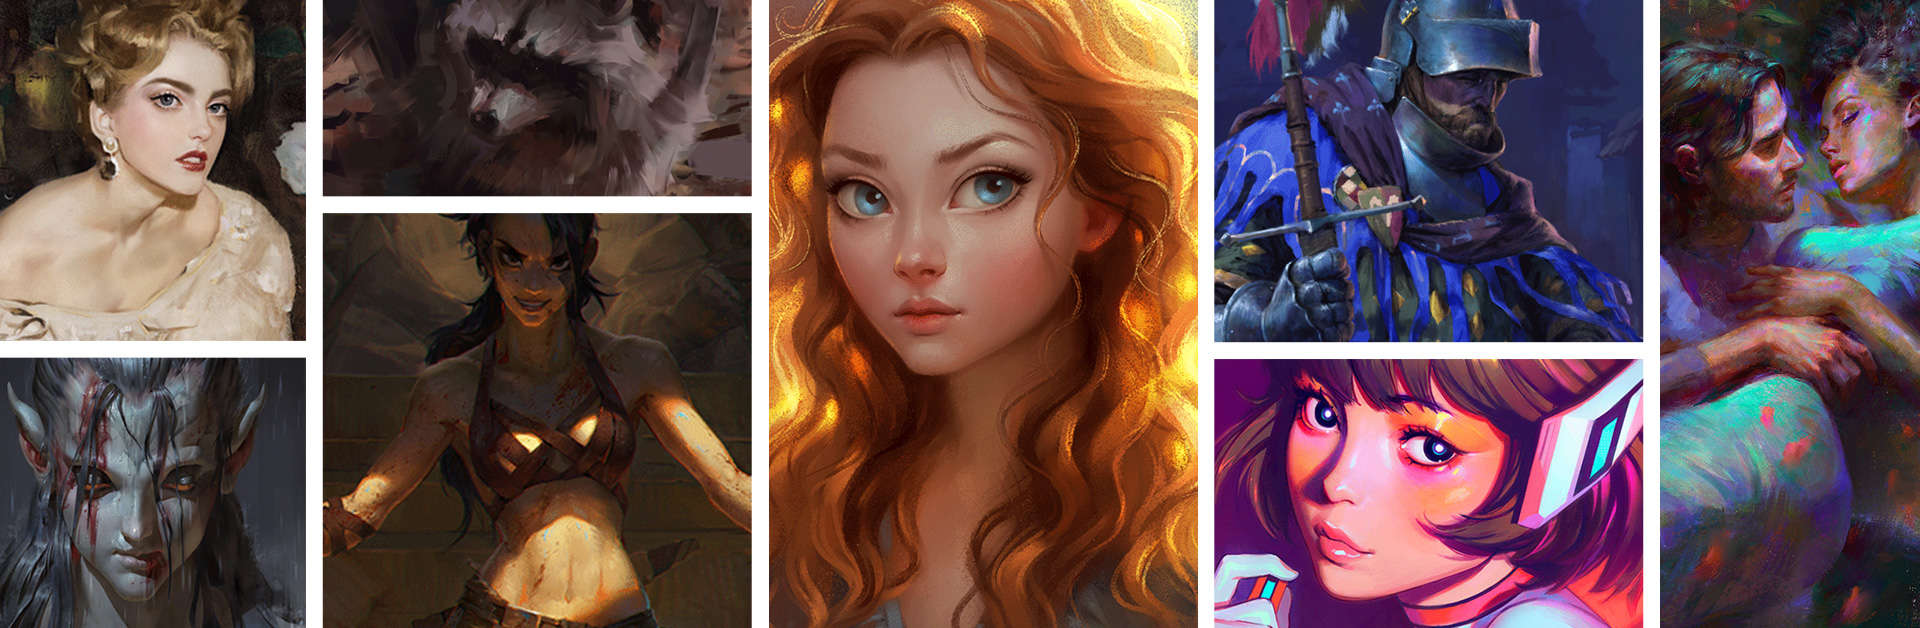 14 Fascinating Digital Painting Process Animations - Paintable